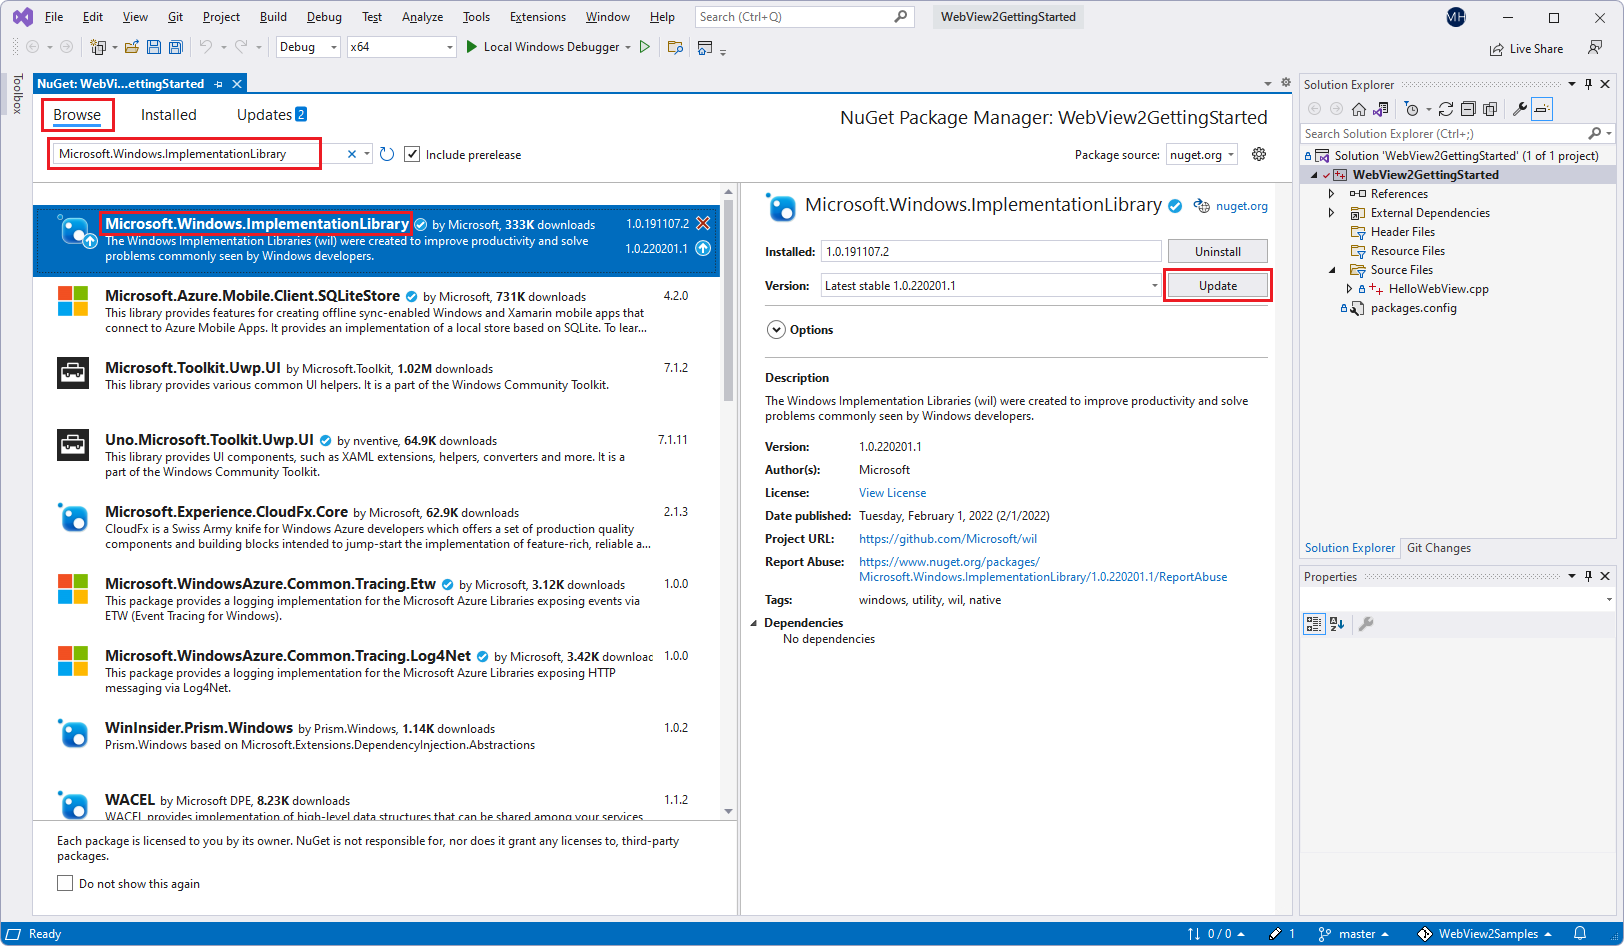 Selecting the 'Microsoft.Windows.ImplementationLibrary' package in NuGet Package Manager in Visual Studio